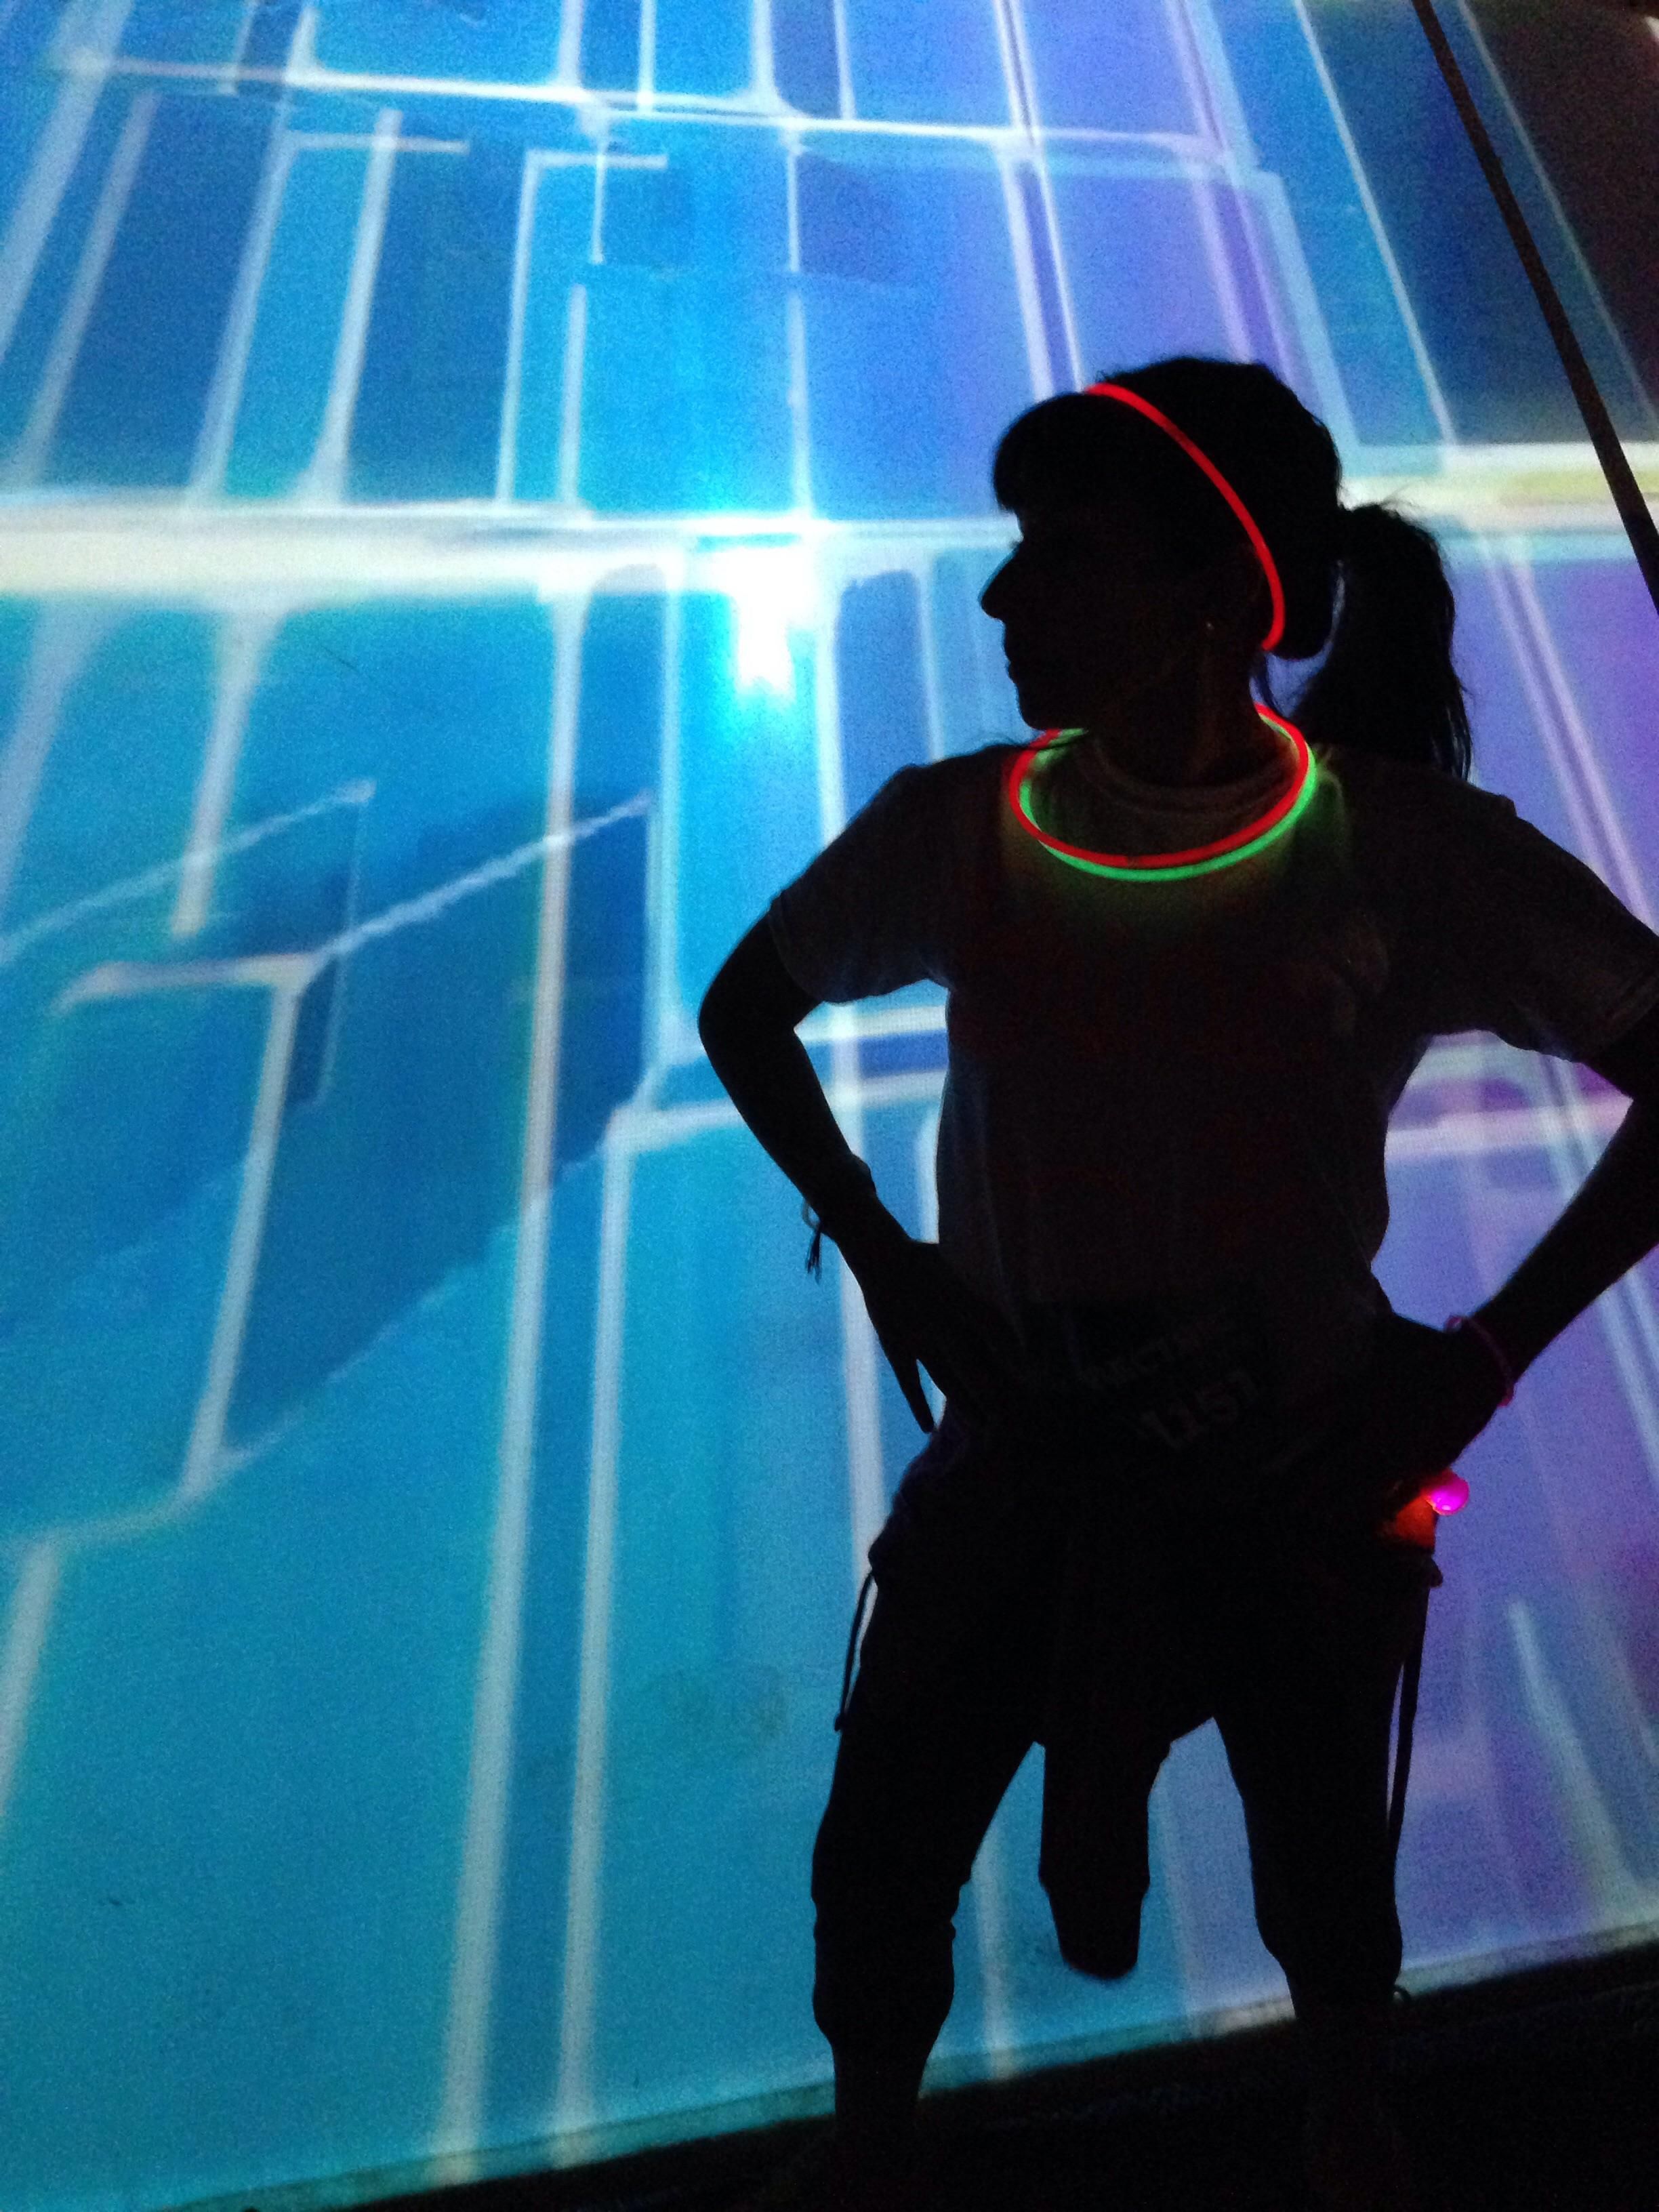 My wife and I recently attended a rave-themed 5K event. I took this picture of her standing in front of a light board...